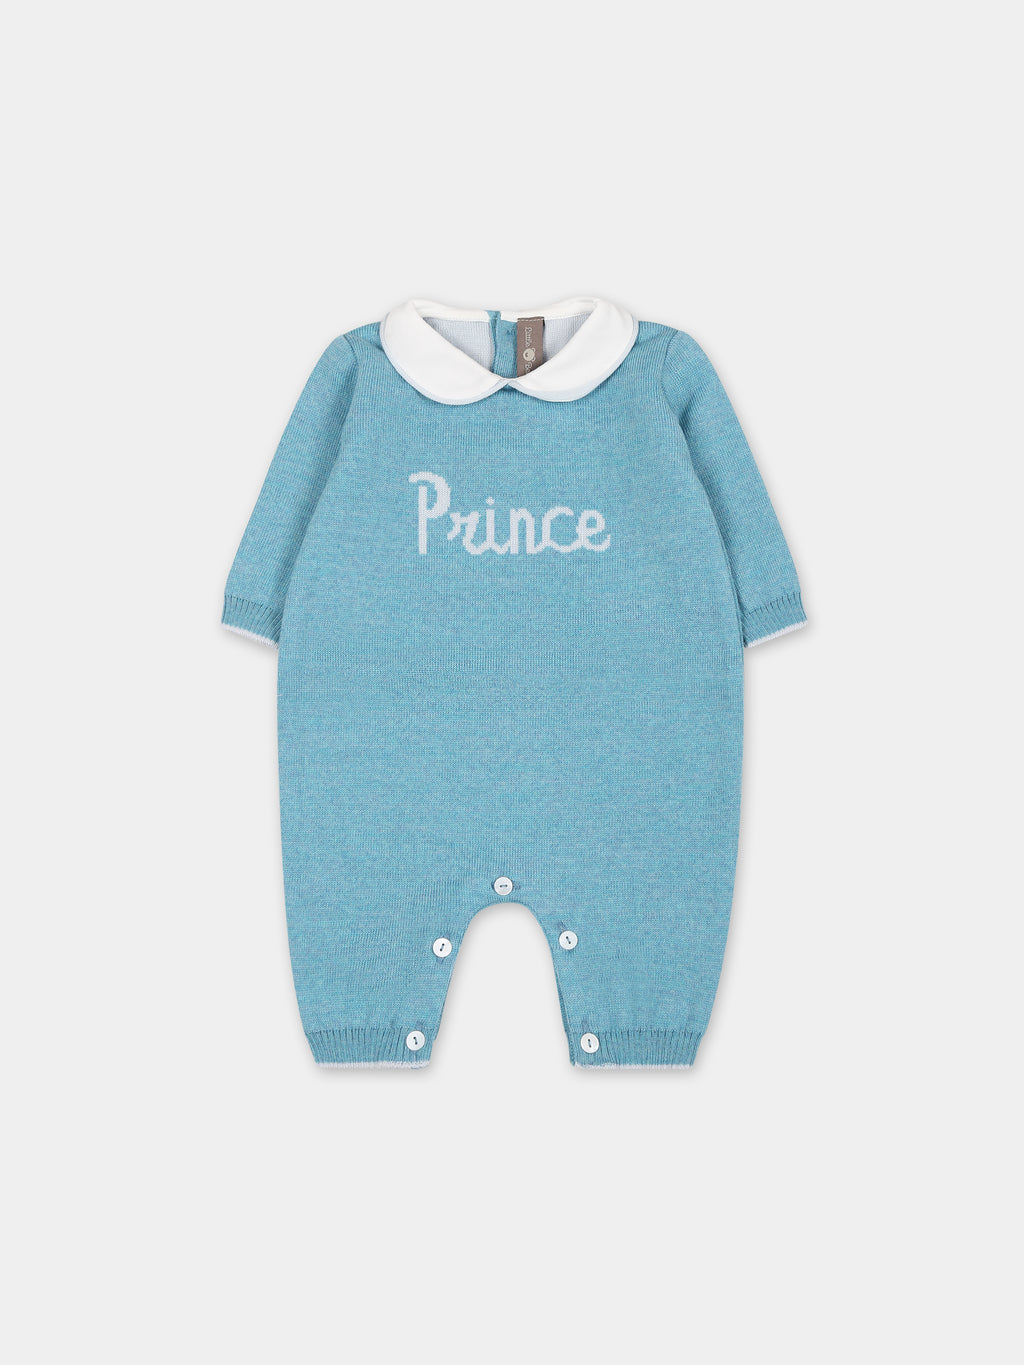 Light blue babygrown for baby boy with embroidered  Prince  writing